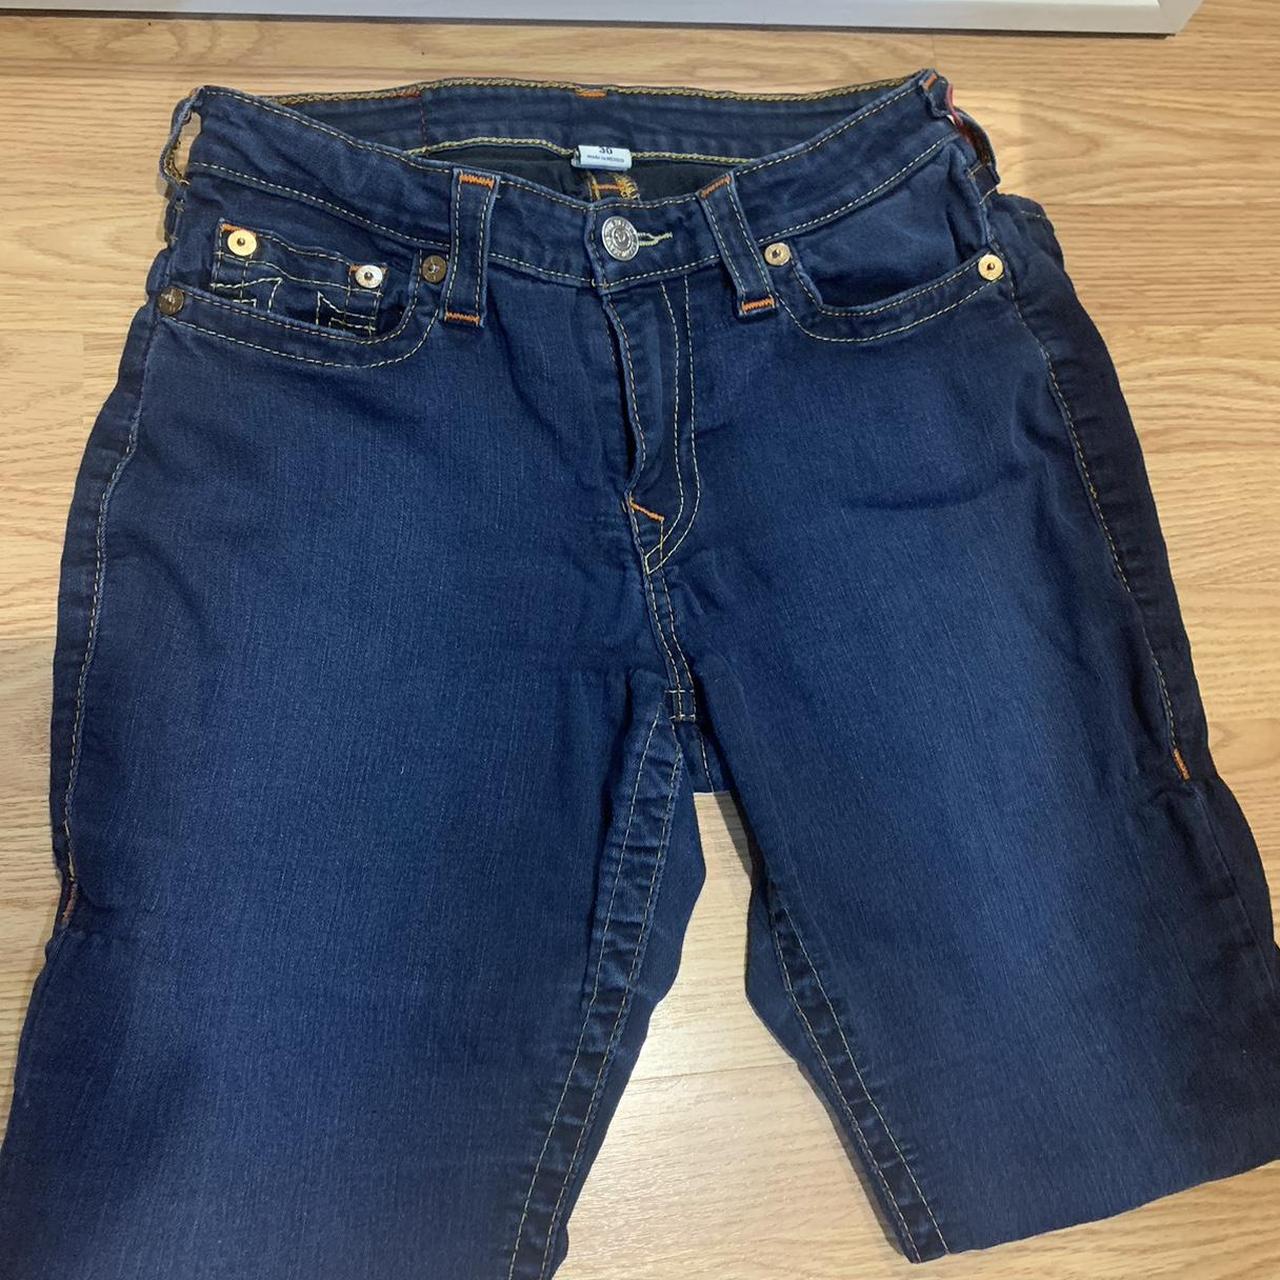 True Religion skinny jeans Size: 30 defects noted... - Depop